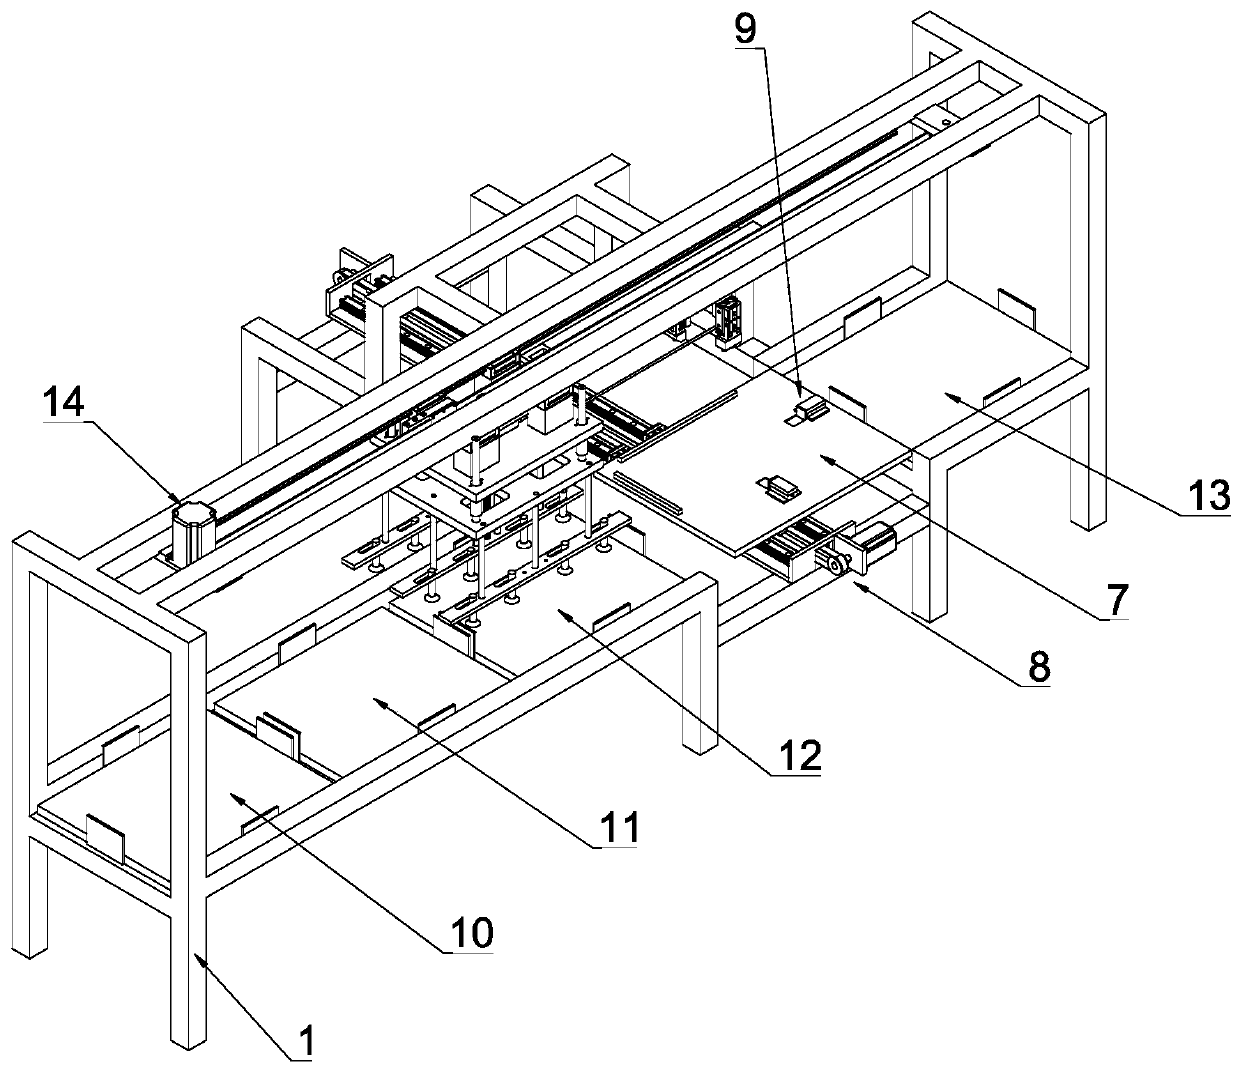 Loading device used for board composite welding